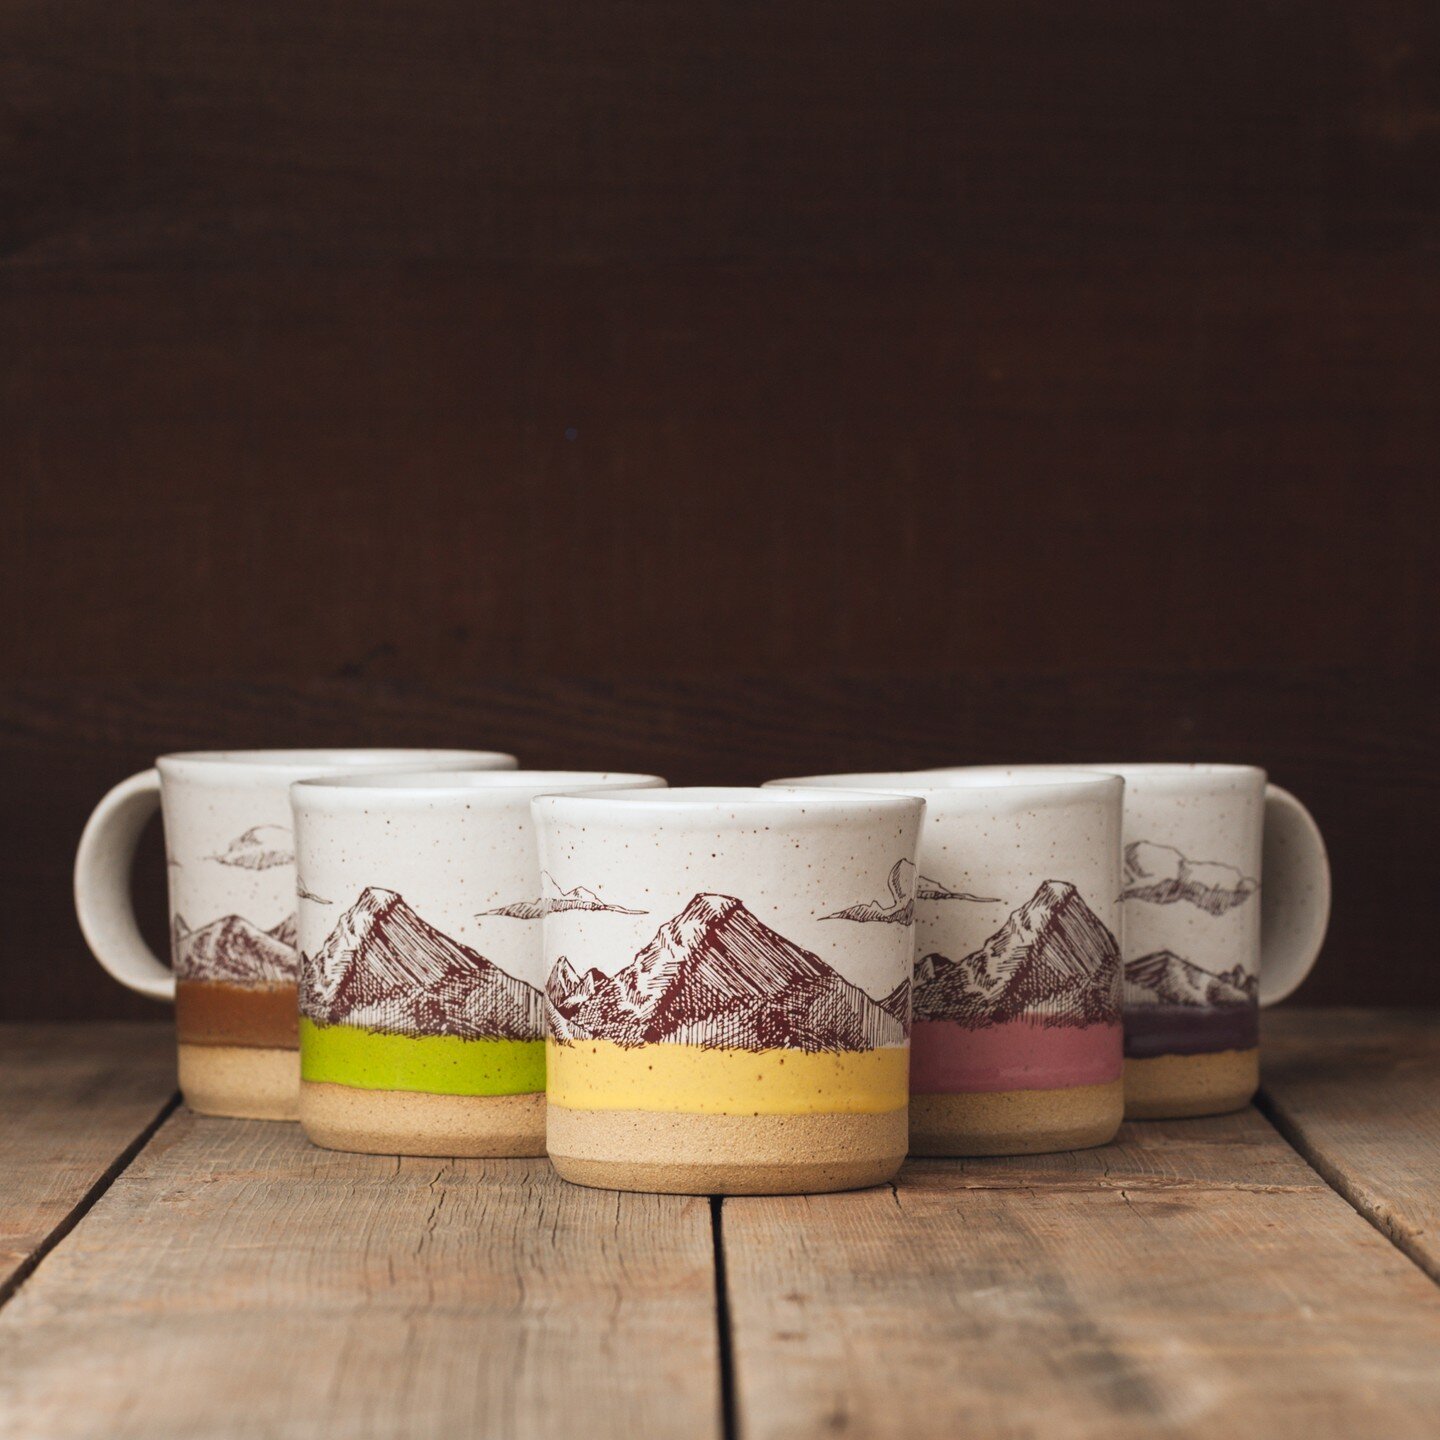 Calico Mountain Mugs are at the downtown shop today @riversidestudios 💛 💚💗💜🧡

Yellow, Green, Pink, Purple and Brown.

#wheelthrownpottery #ceramiccoffeemug #coffeelovers #handmadepottery